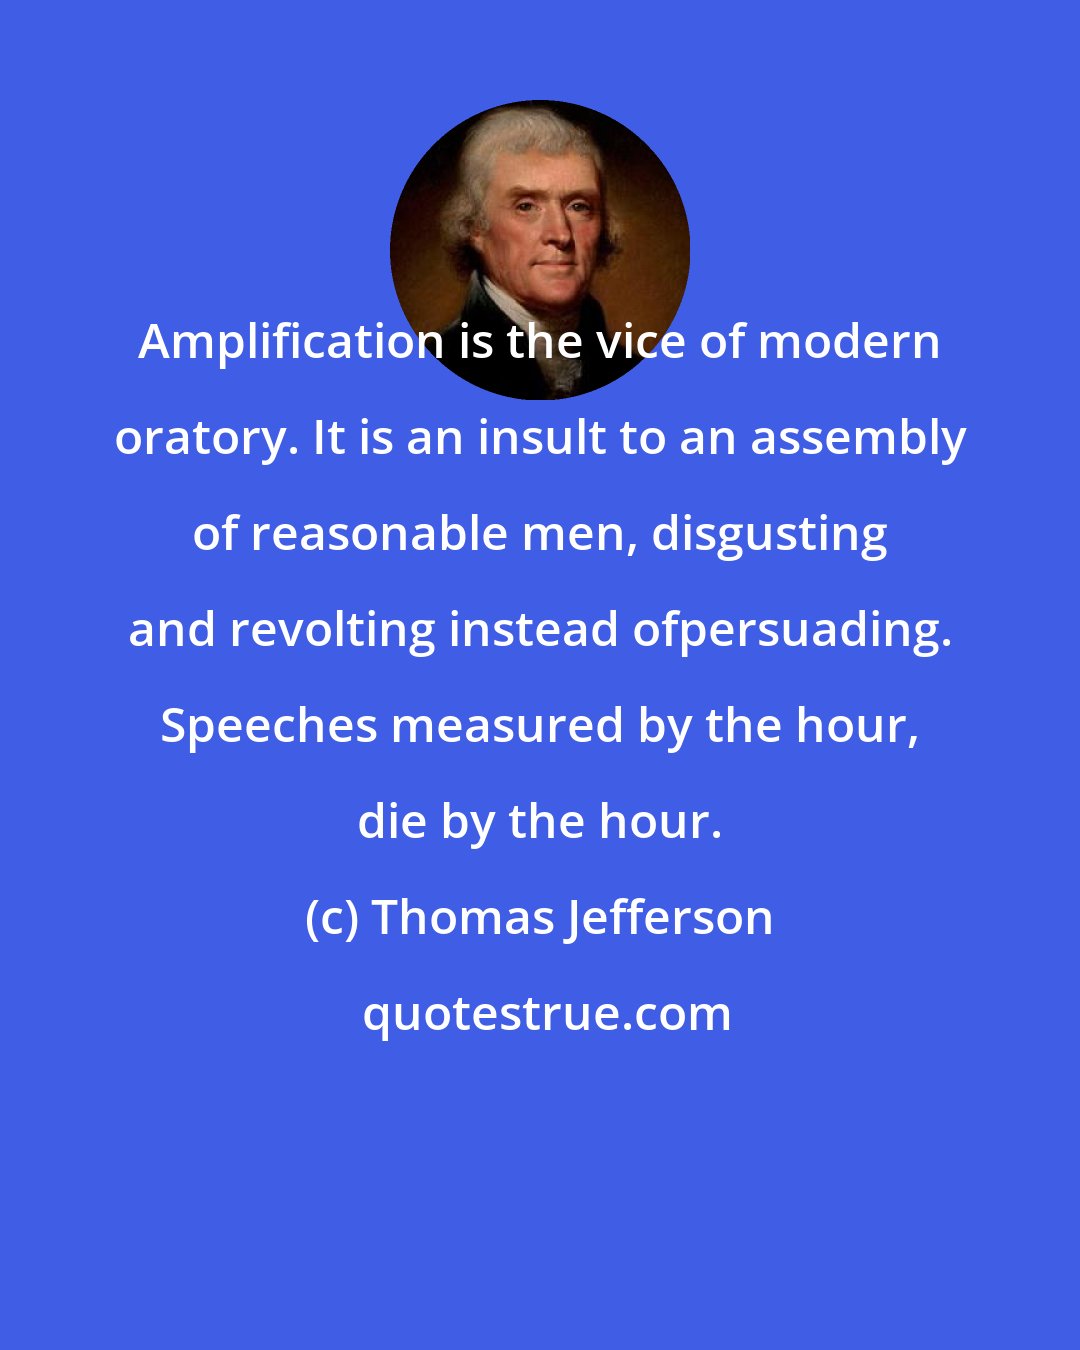 Thomas Jefferson: Amplification is the vice of modern oratory. It is an insult to an assembly of reasonable men, disgusting and revolting instead ofpersuading. Speeches measured by the hour, die by the hour.